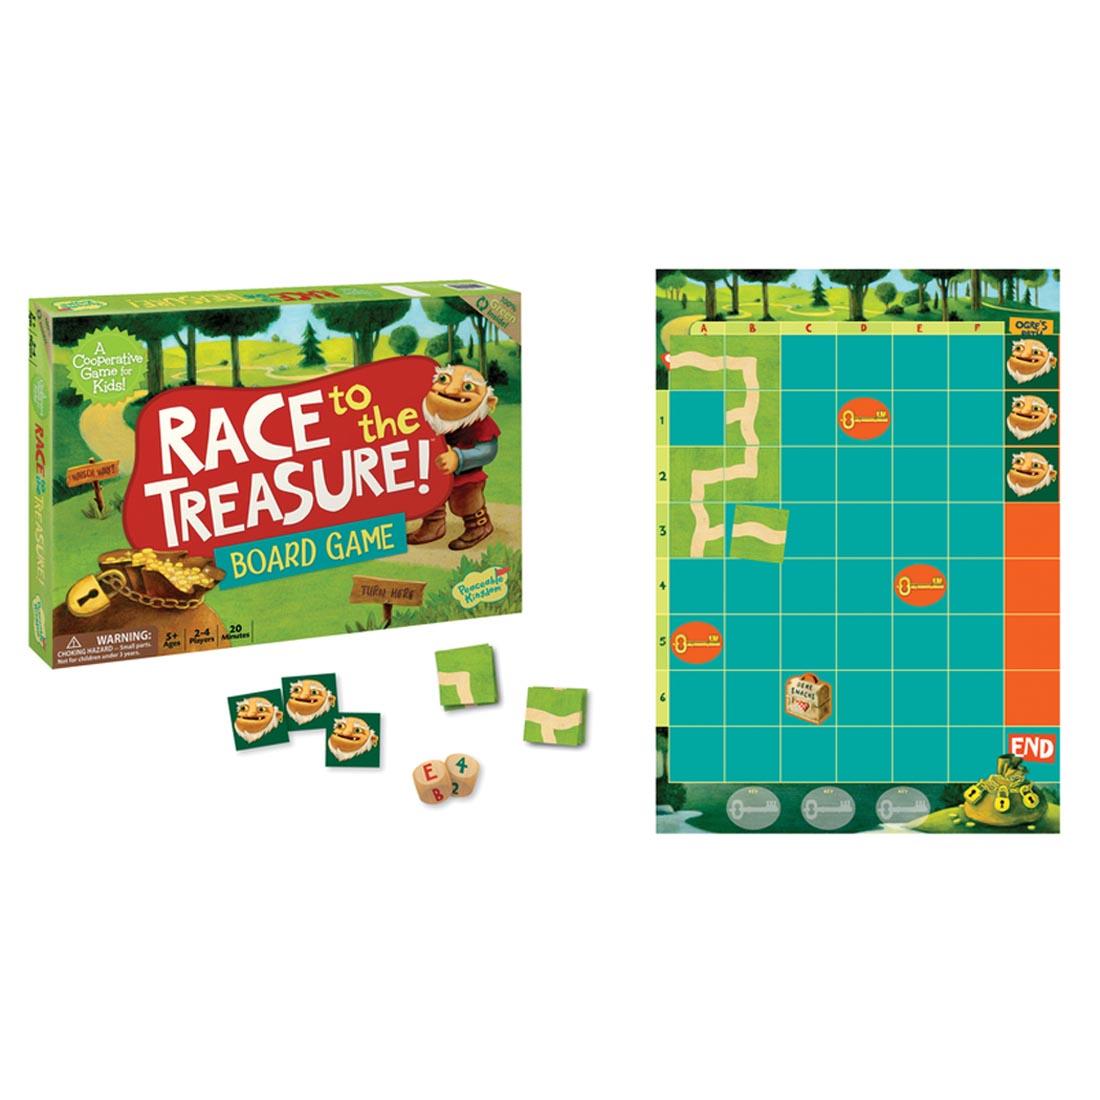 Race To The Treasure! Cooperative Board Game by Peaceable Kingdom